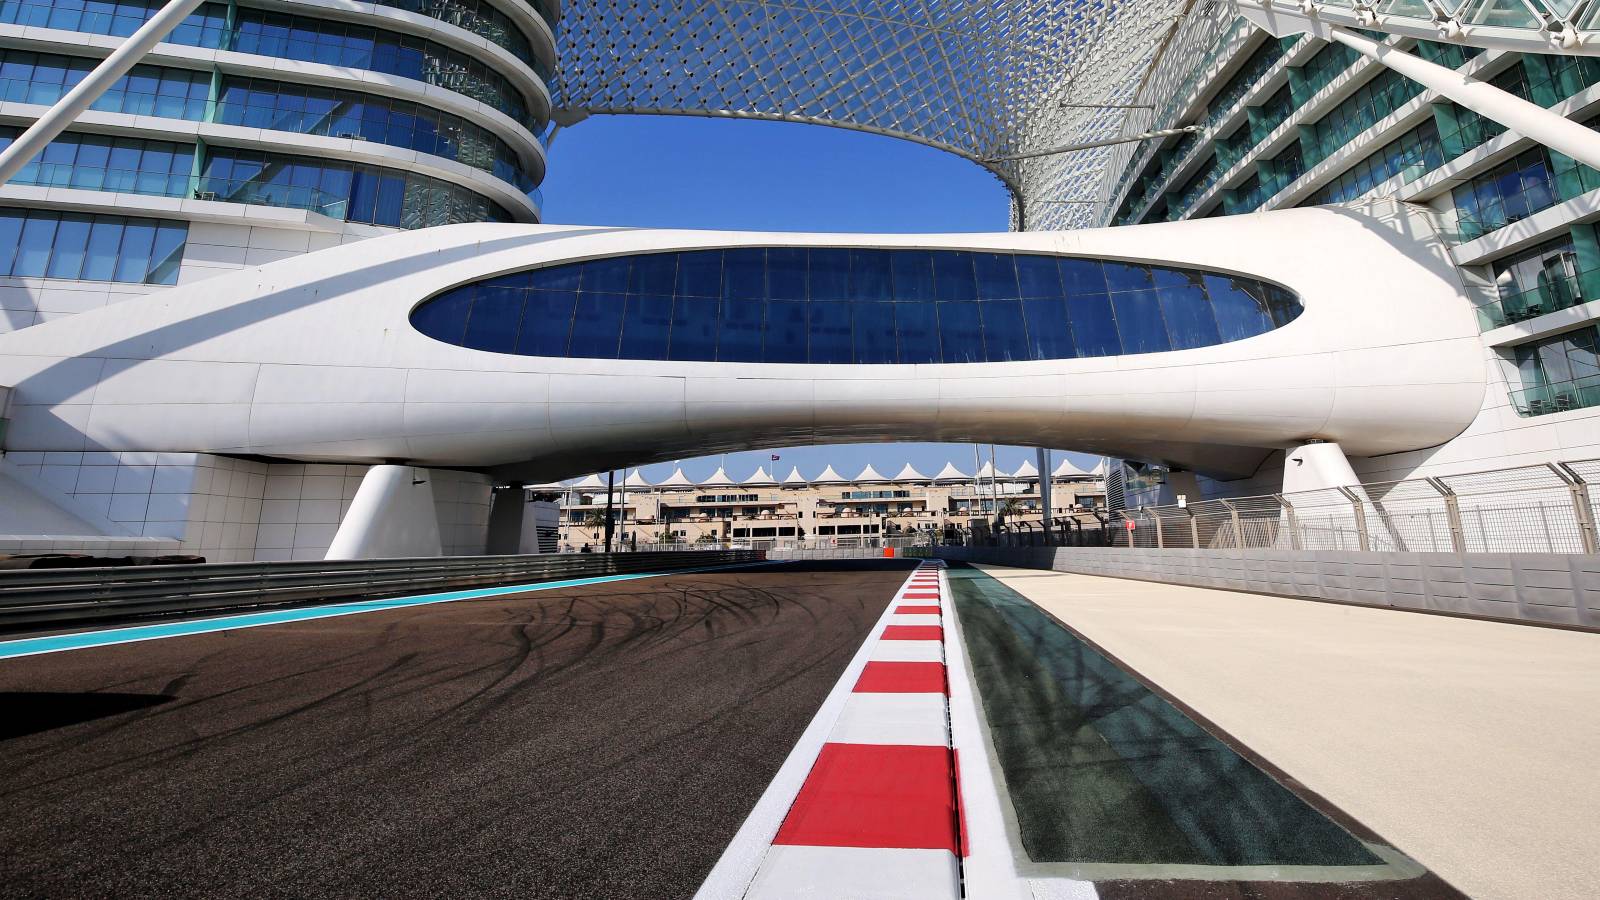 What the drivers can expect from the Abu Dhabi Grand Prix weather?